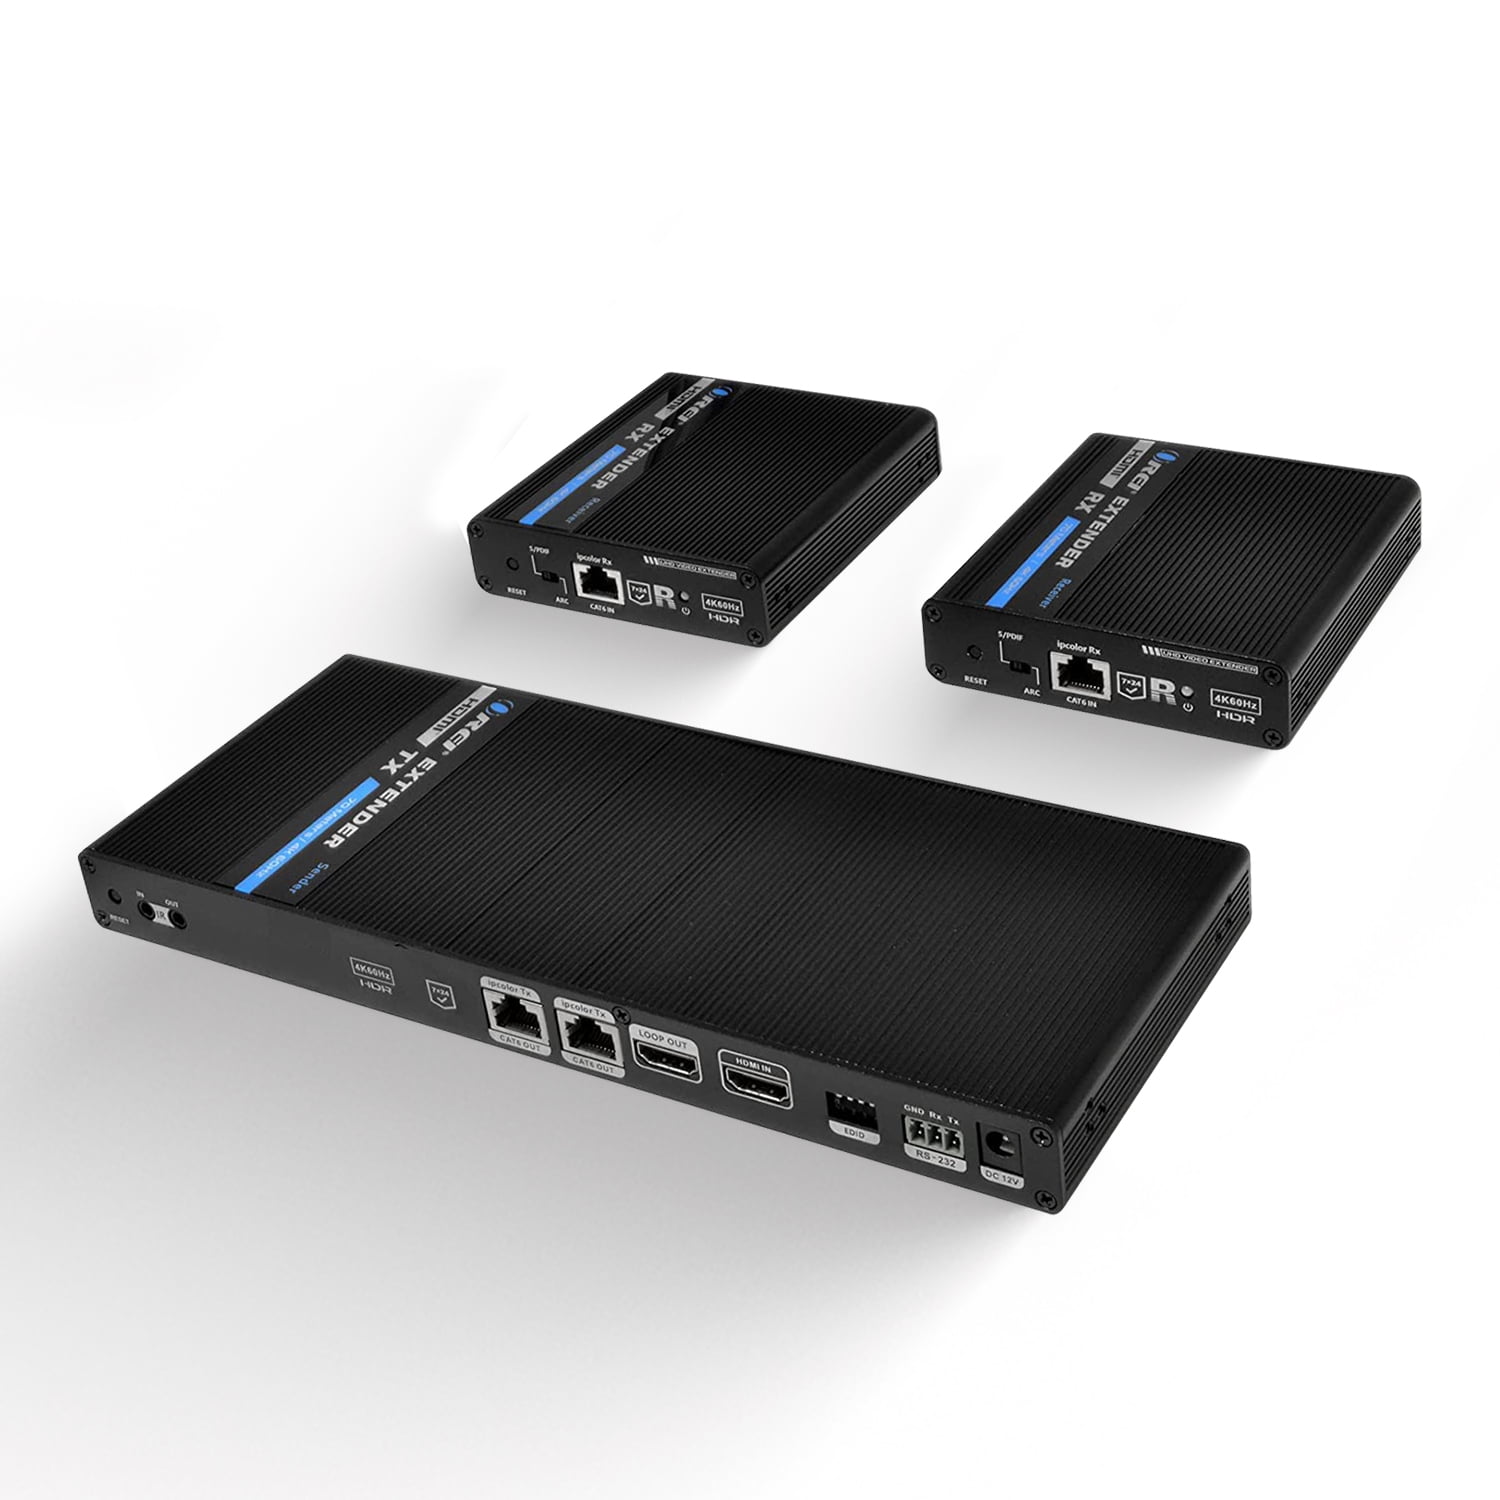 Loop Out Low Latency 1x2 HDMI Extender Splitter 4K by OREI Multiple Over Single Cable CAT6/7 4K@60Hz 4:4:4 HDCP 2.2 with IR Remote EDID Management Up to 230 Ft Full Support IR RS-232 Control 